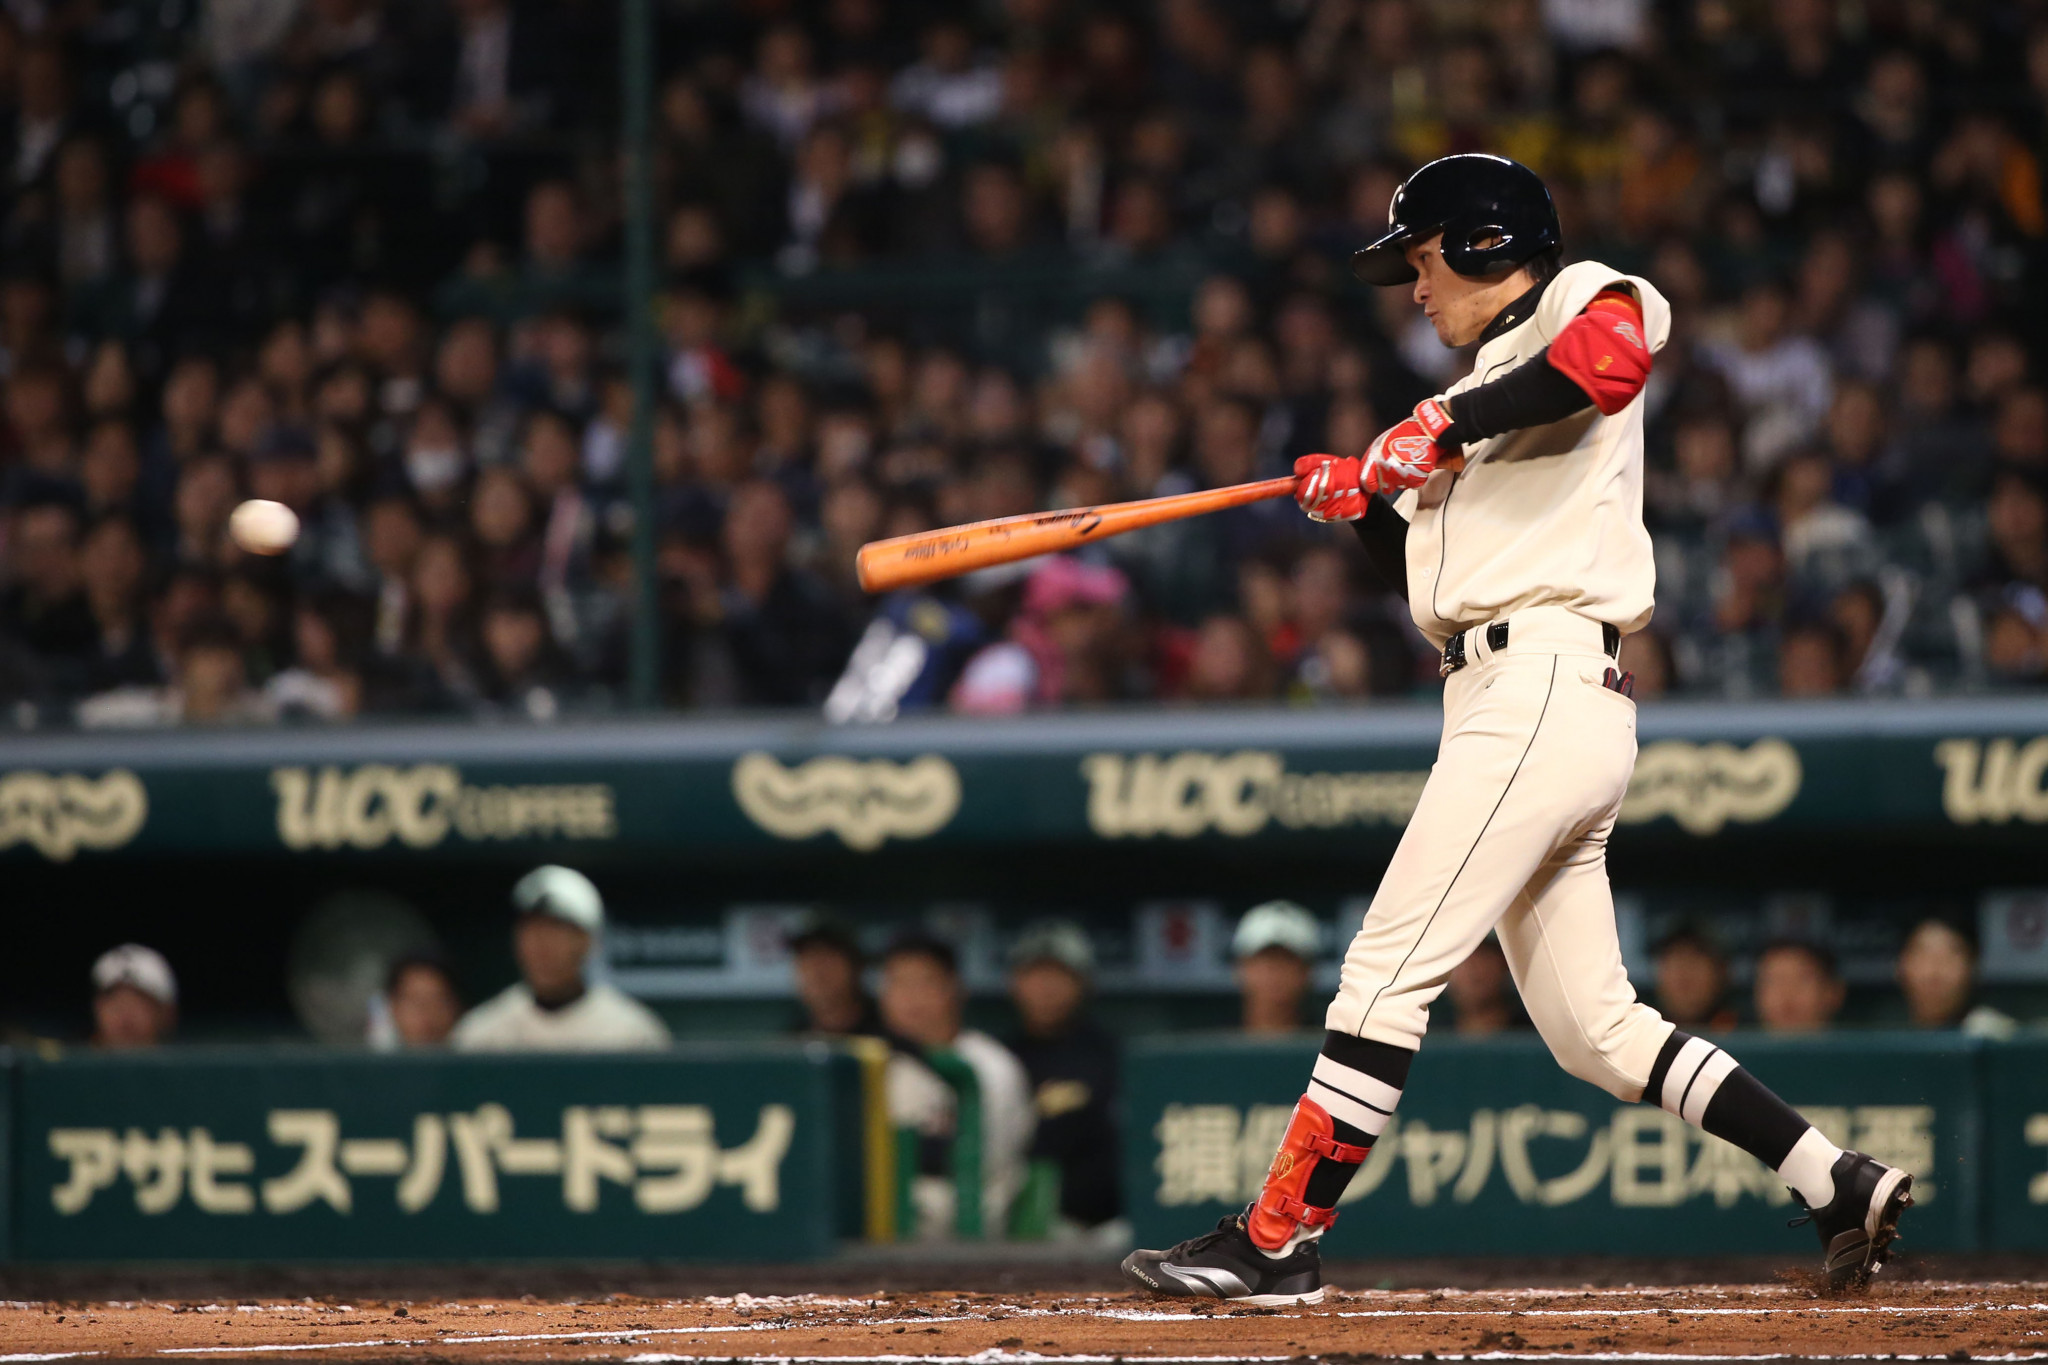 Competition would have taken place at the Koshien Stadium ©Getty Images